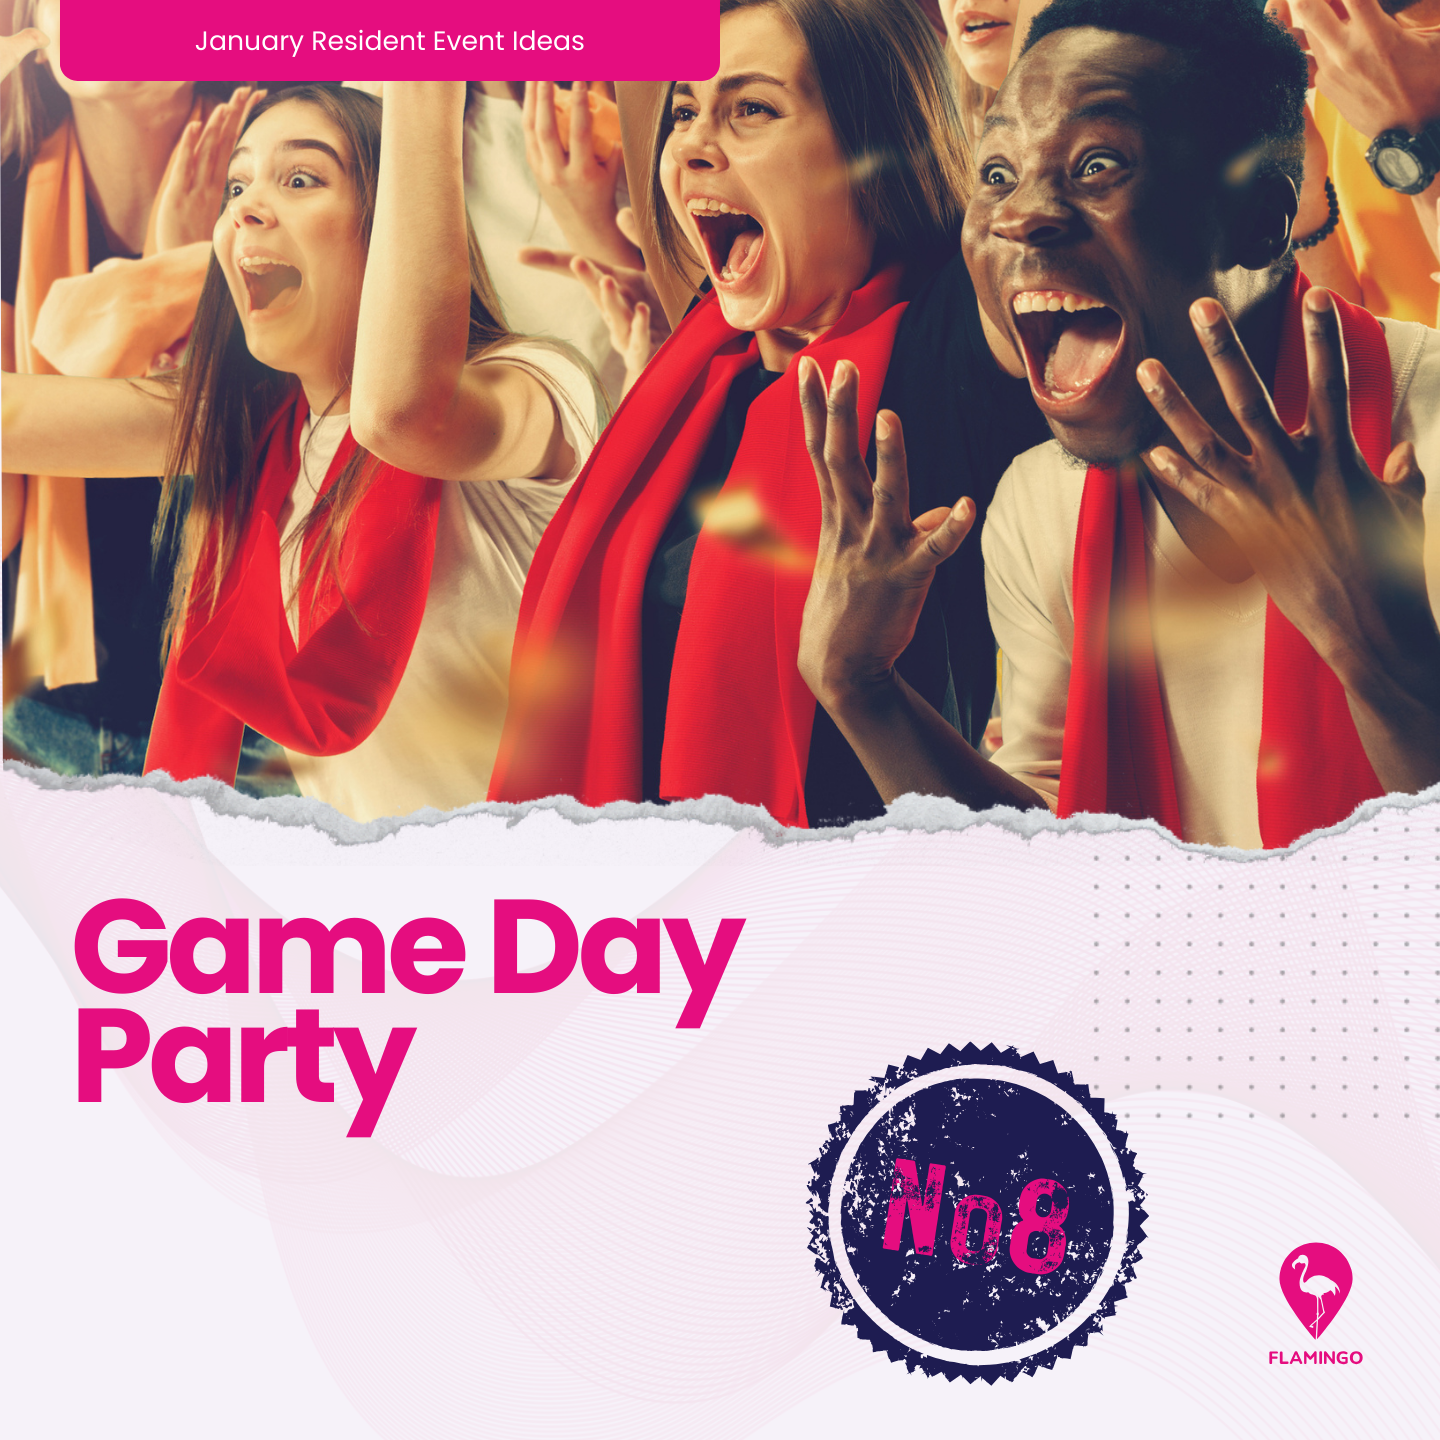 Game Day Party | January Resident Event Ideas